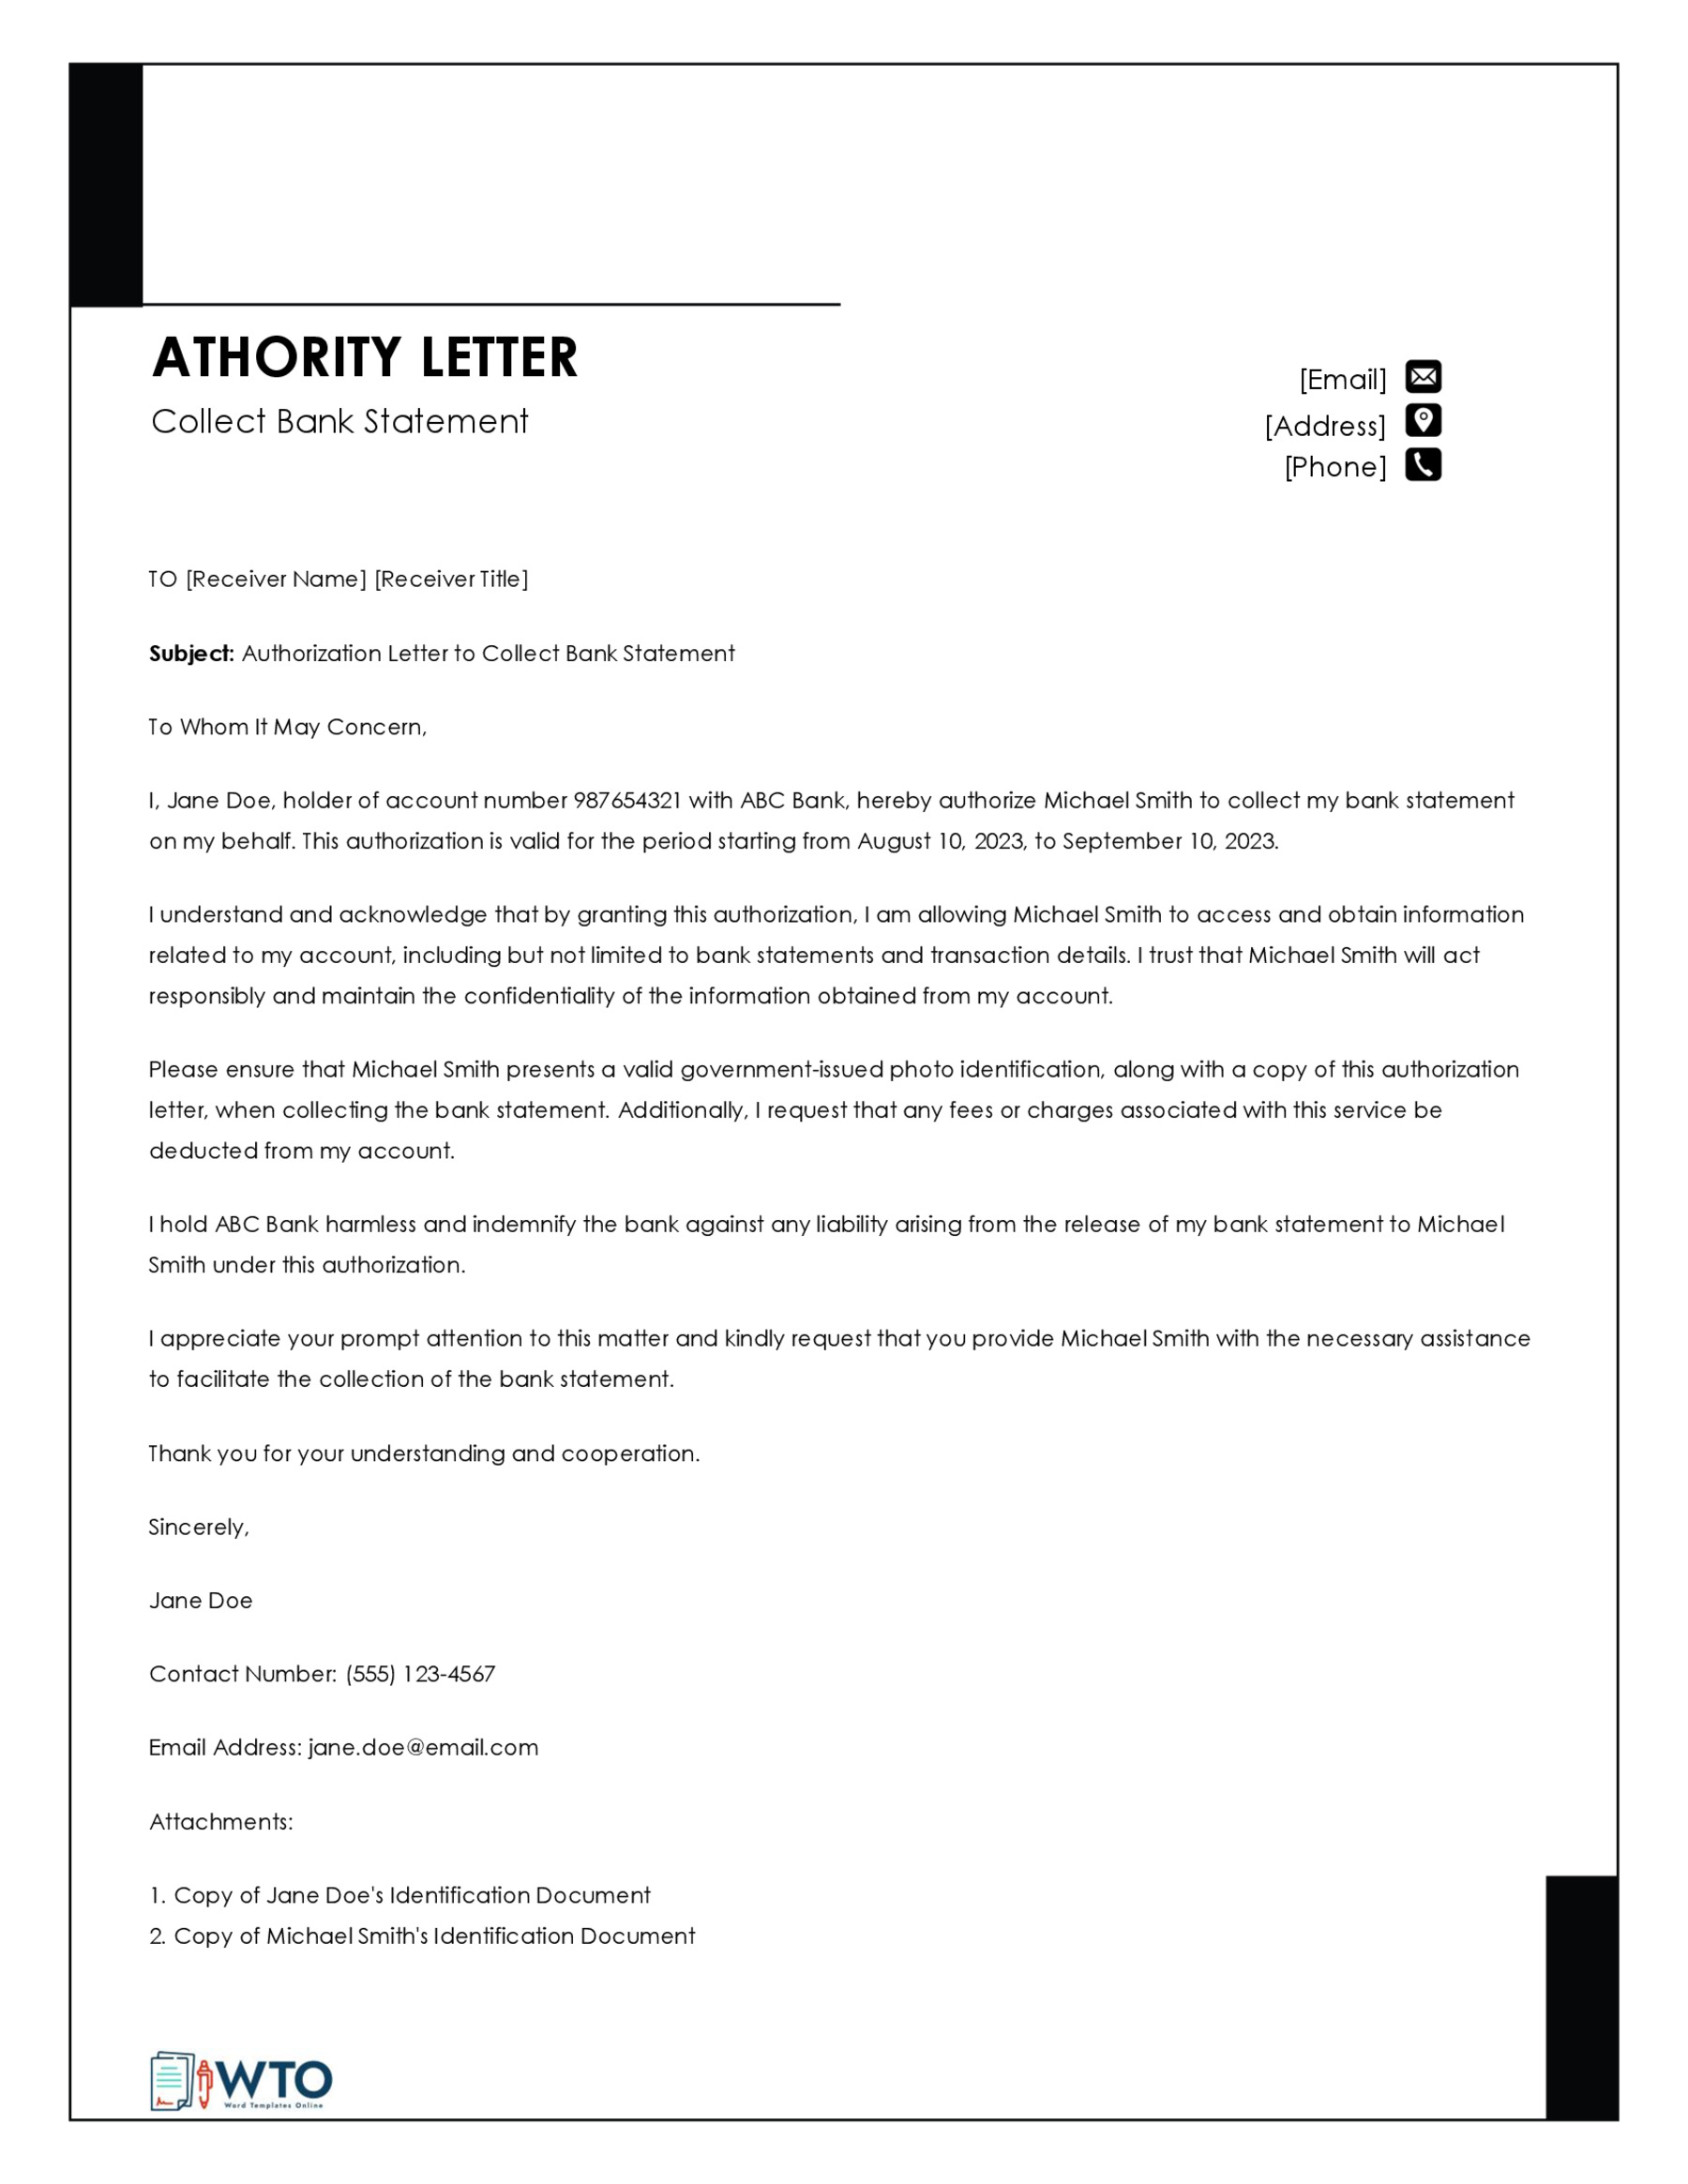 Authorization Letter Sample to Collect bank statement